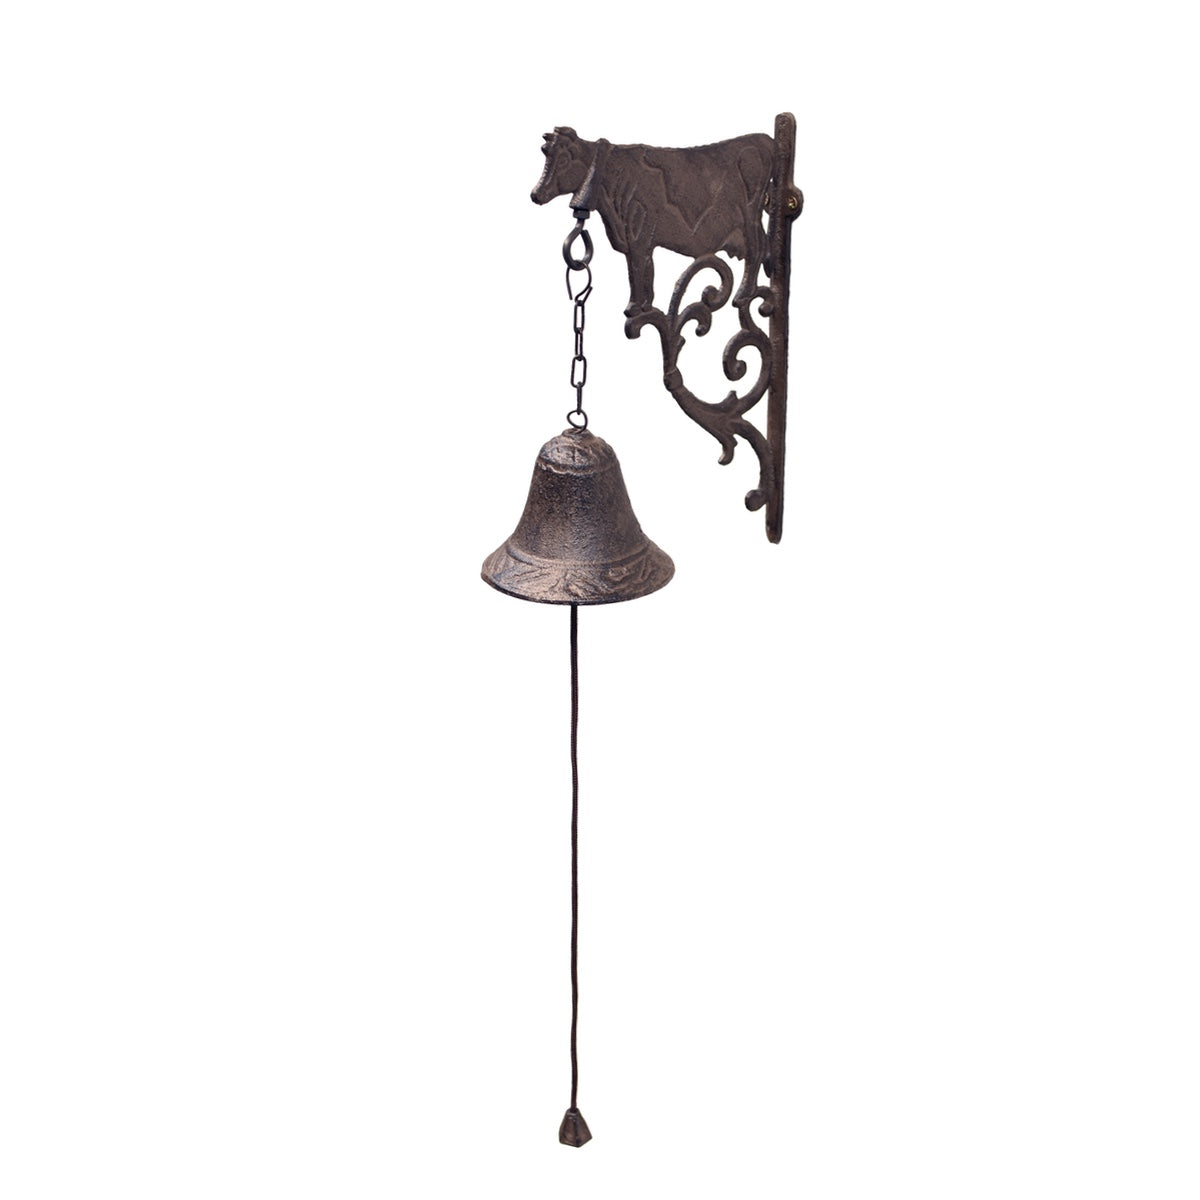 Rustic Cast Iron Wall Hang Cow Call Dinner Bell Vintage Outdoor Farmho